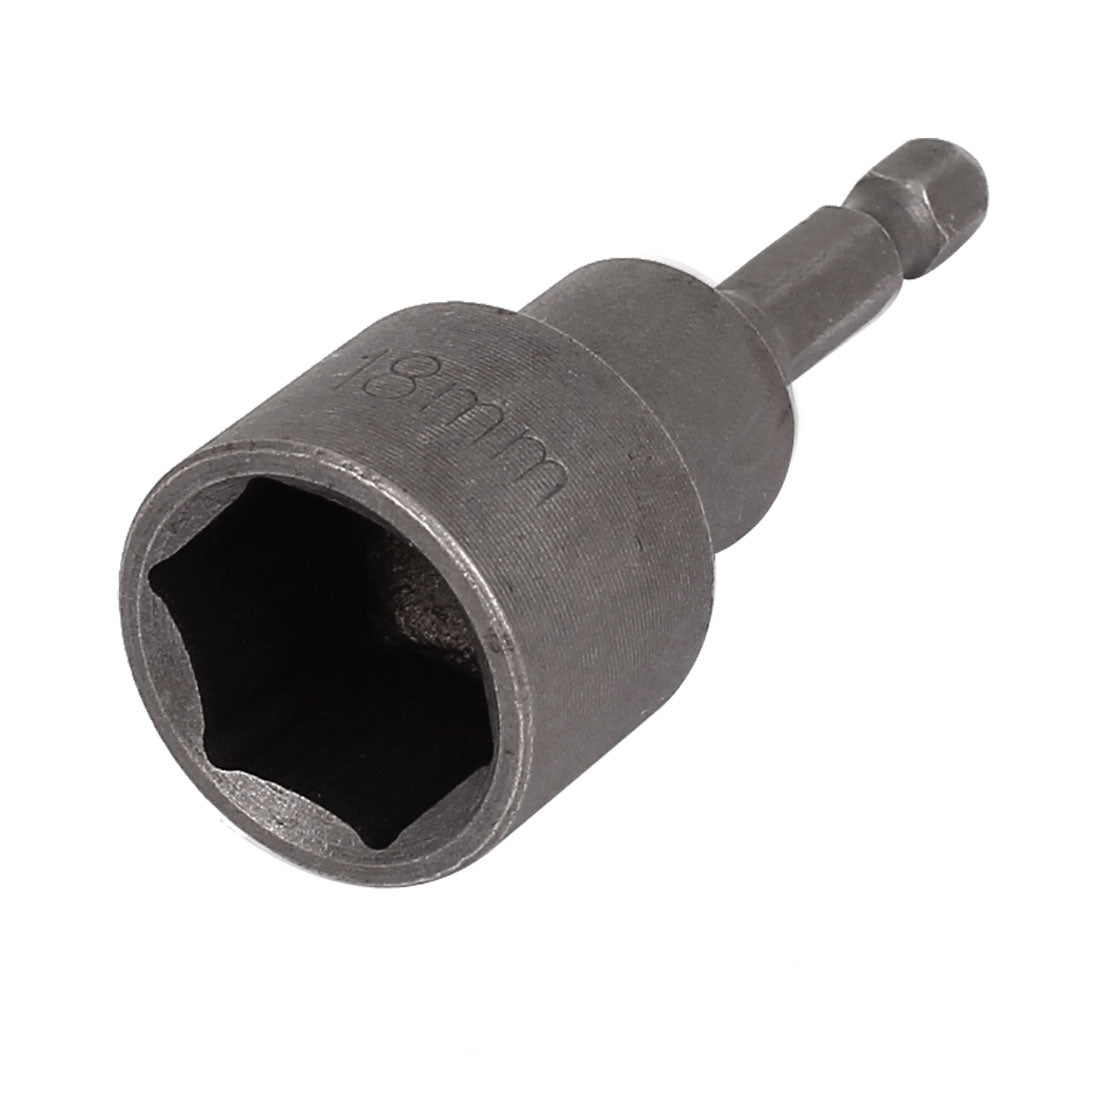 uxcell Uxcell 1/4" Shank 18mm Hex Socket Magnetic Nut Driver Bit Adapter Gray